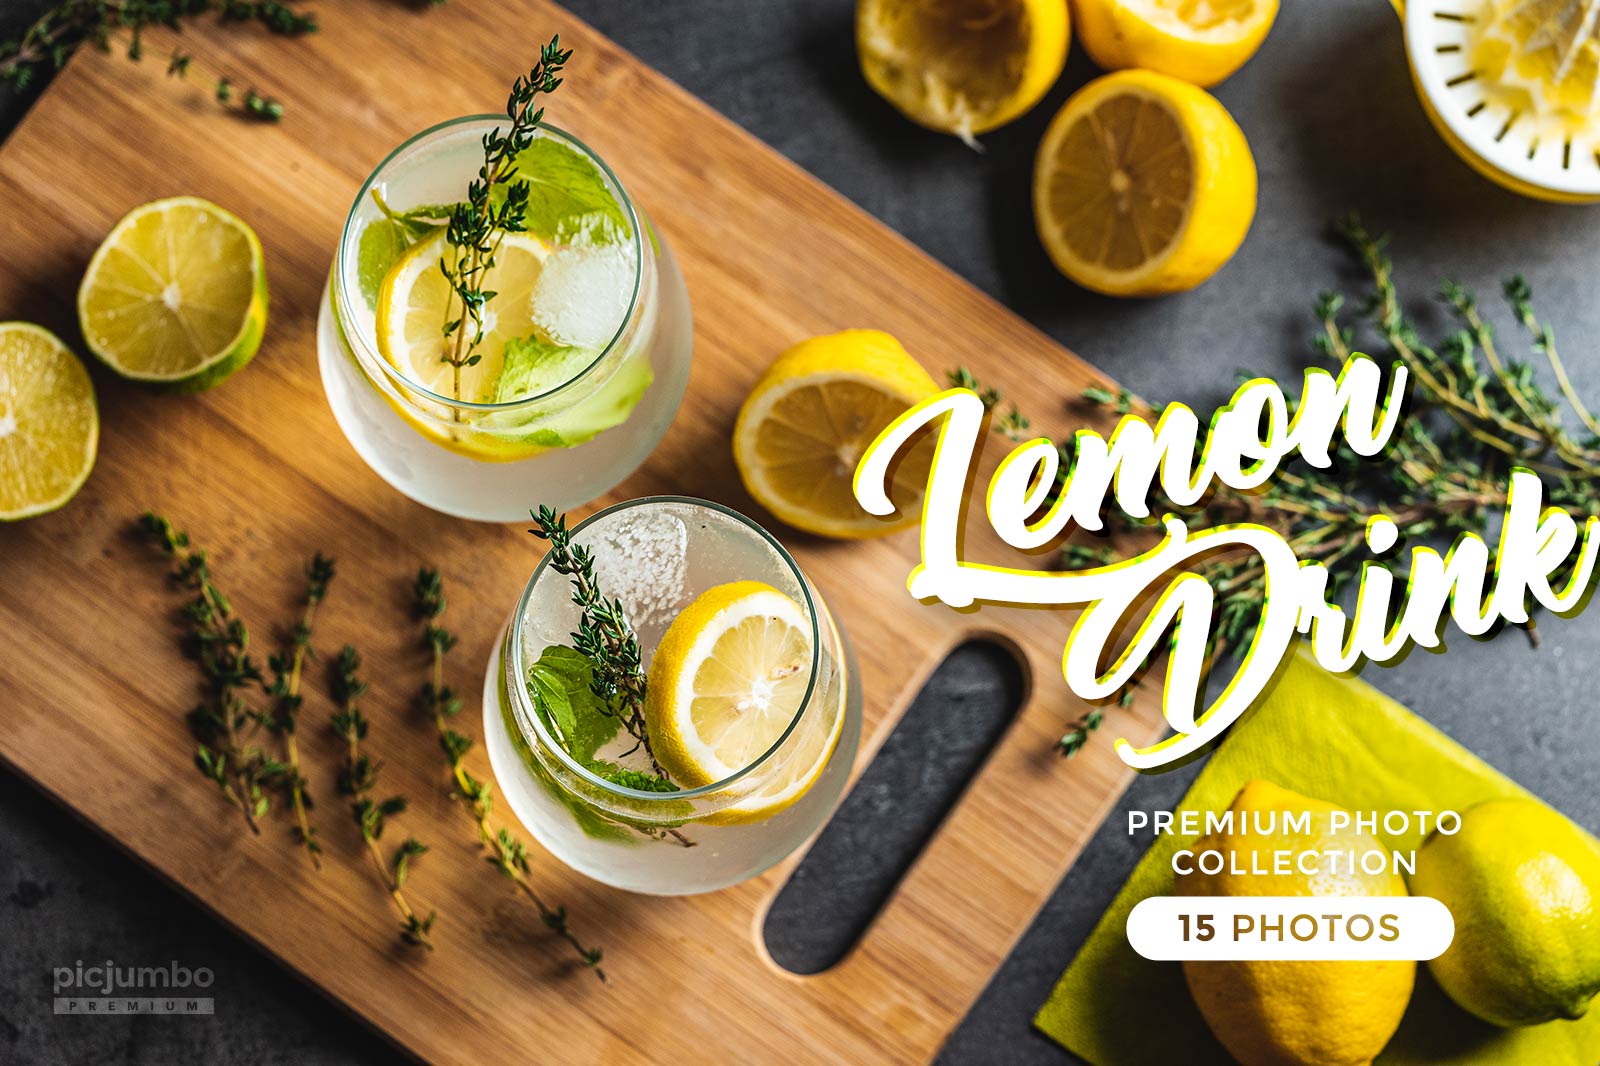 Download hi-res stock photos from our Lemon Drink PREMIUM Collection!